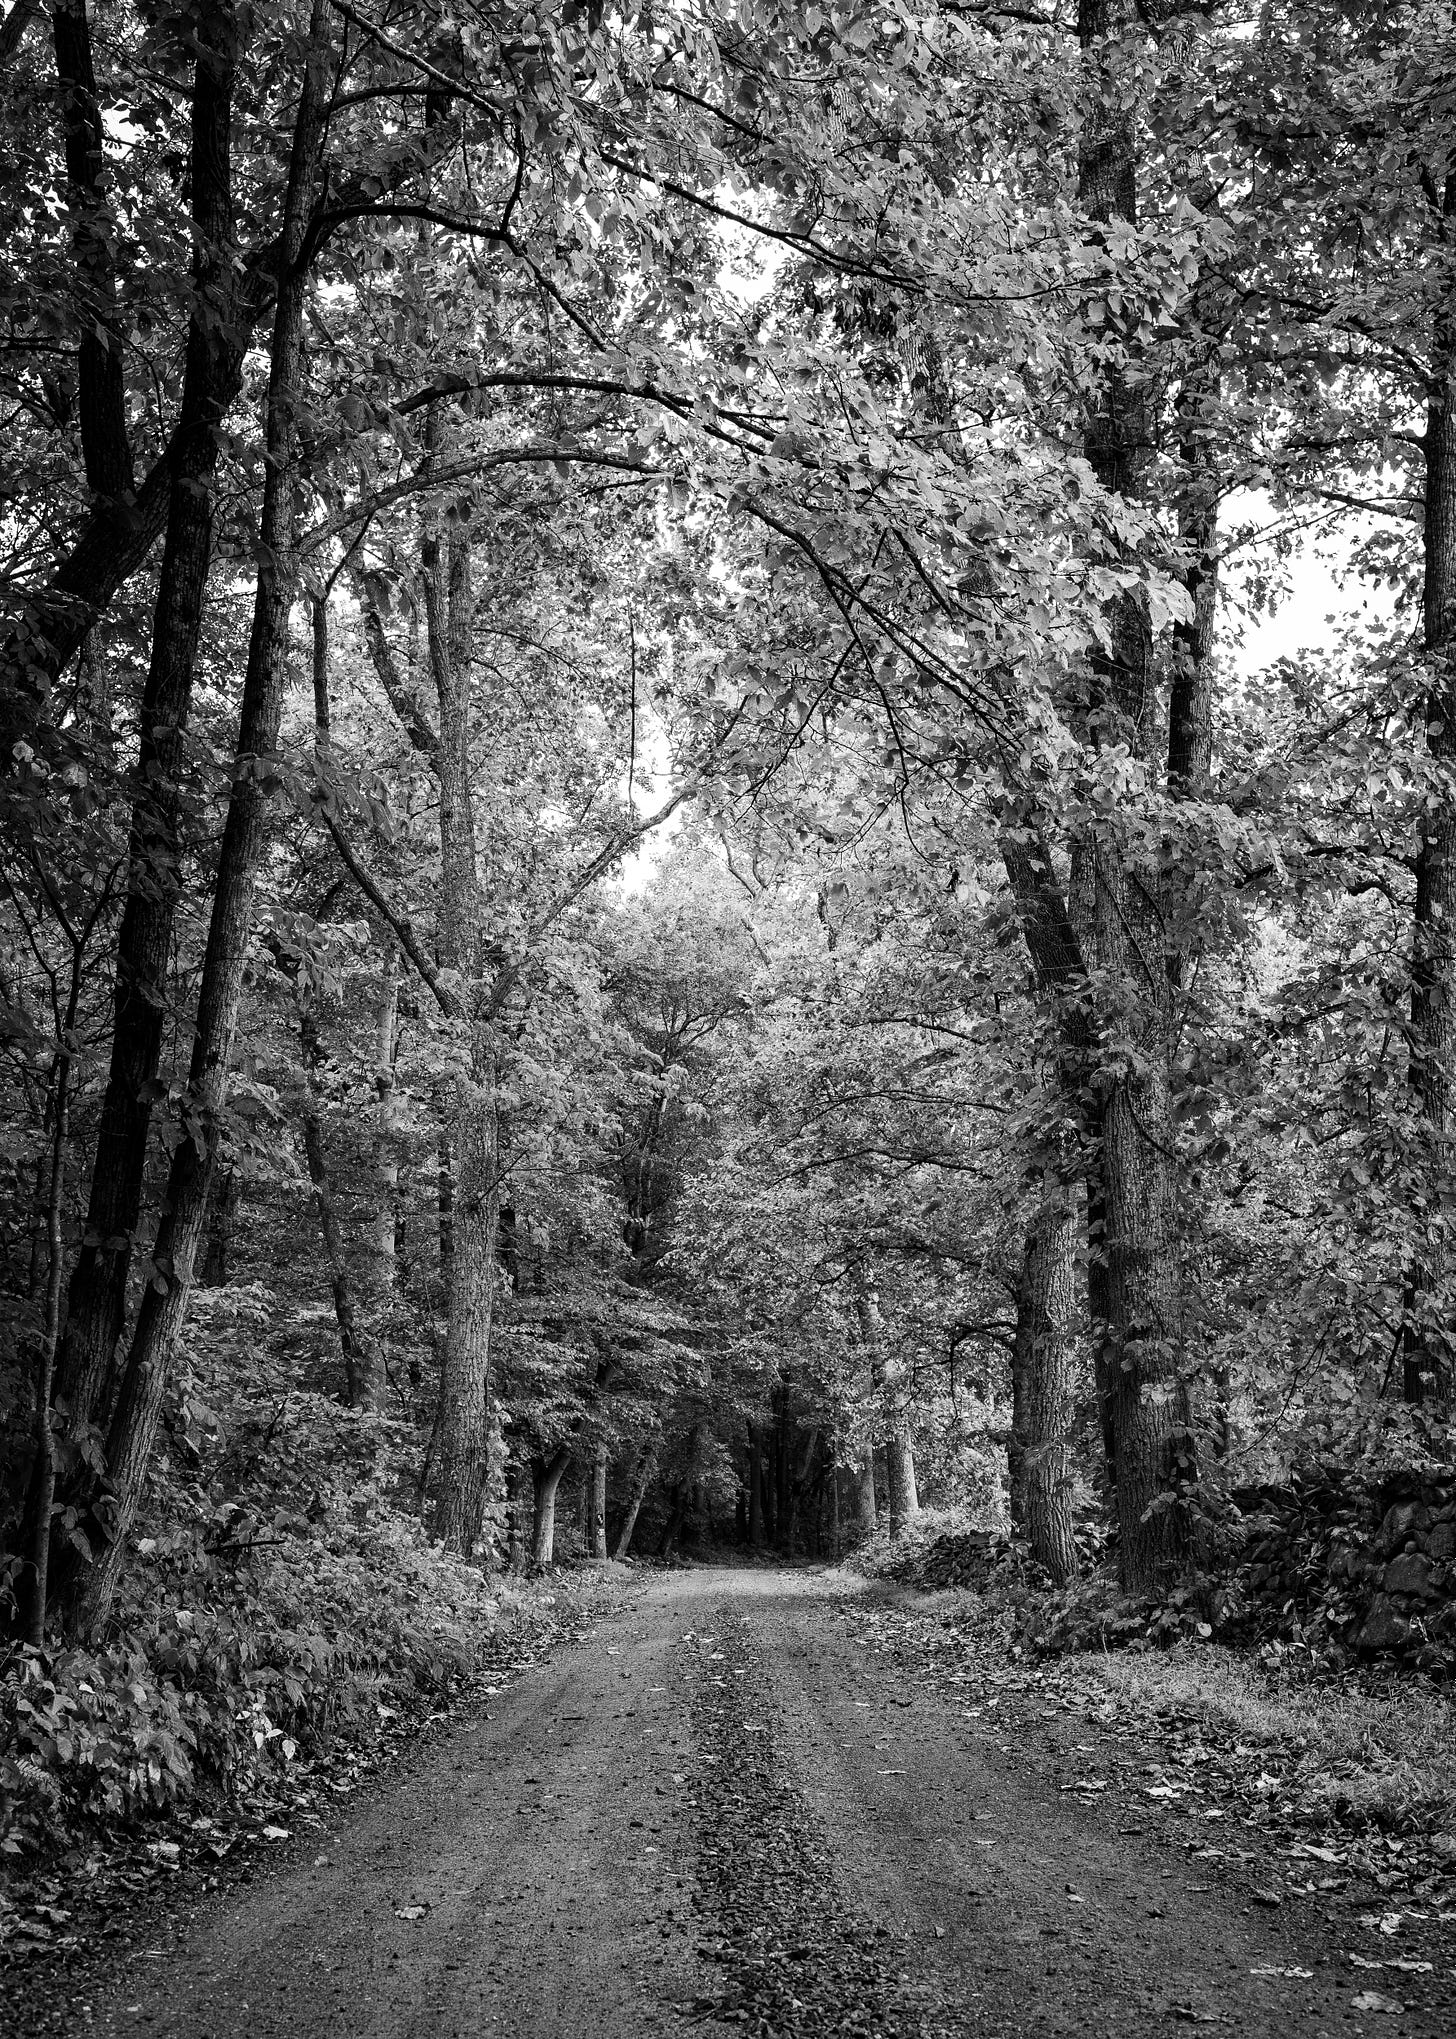 Black and white of a rural dirt road